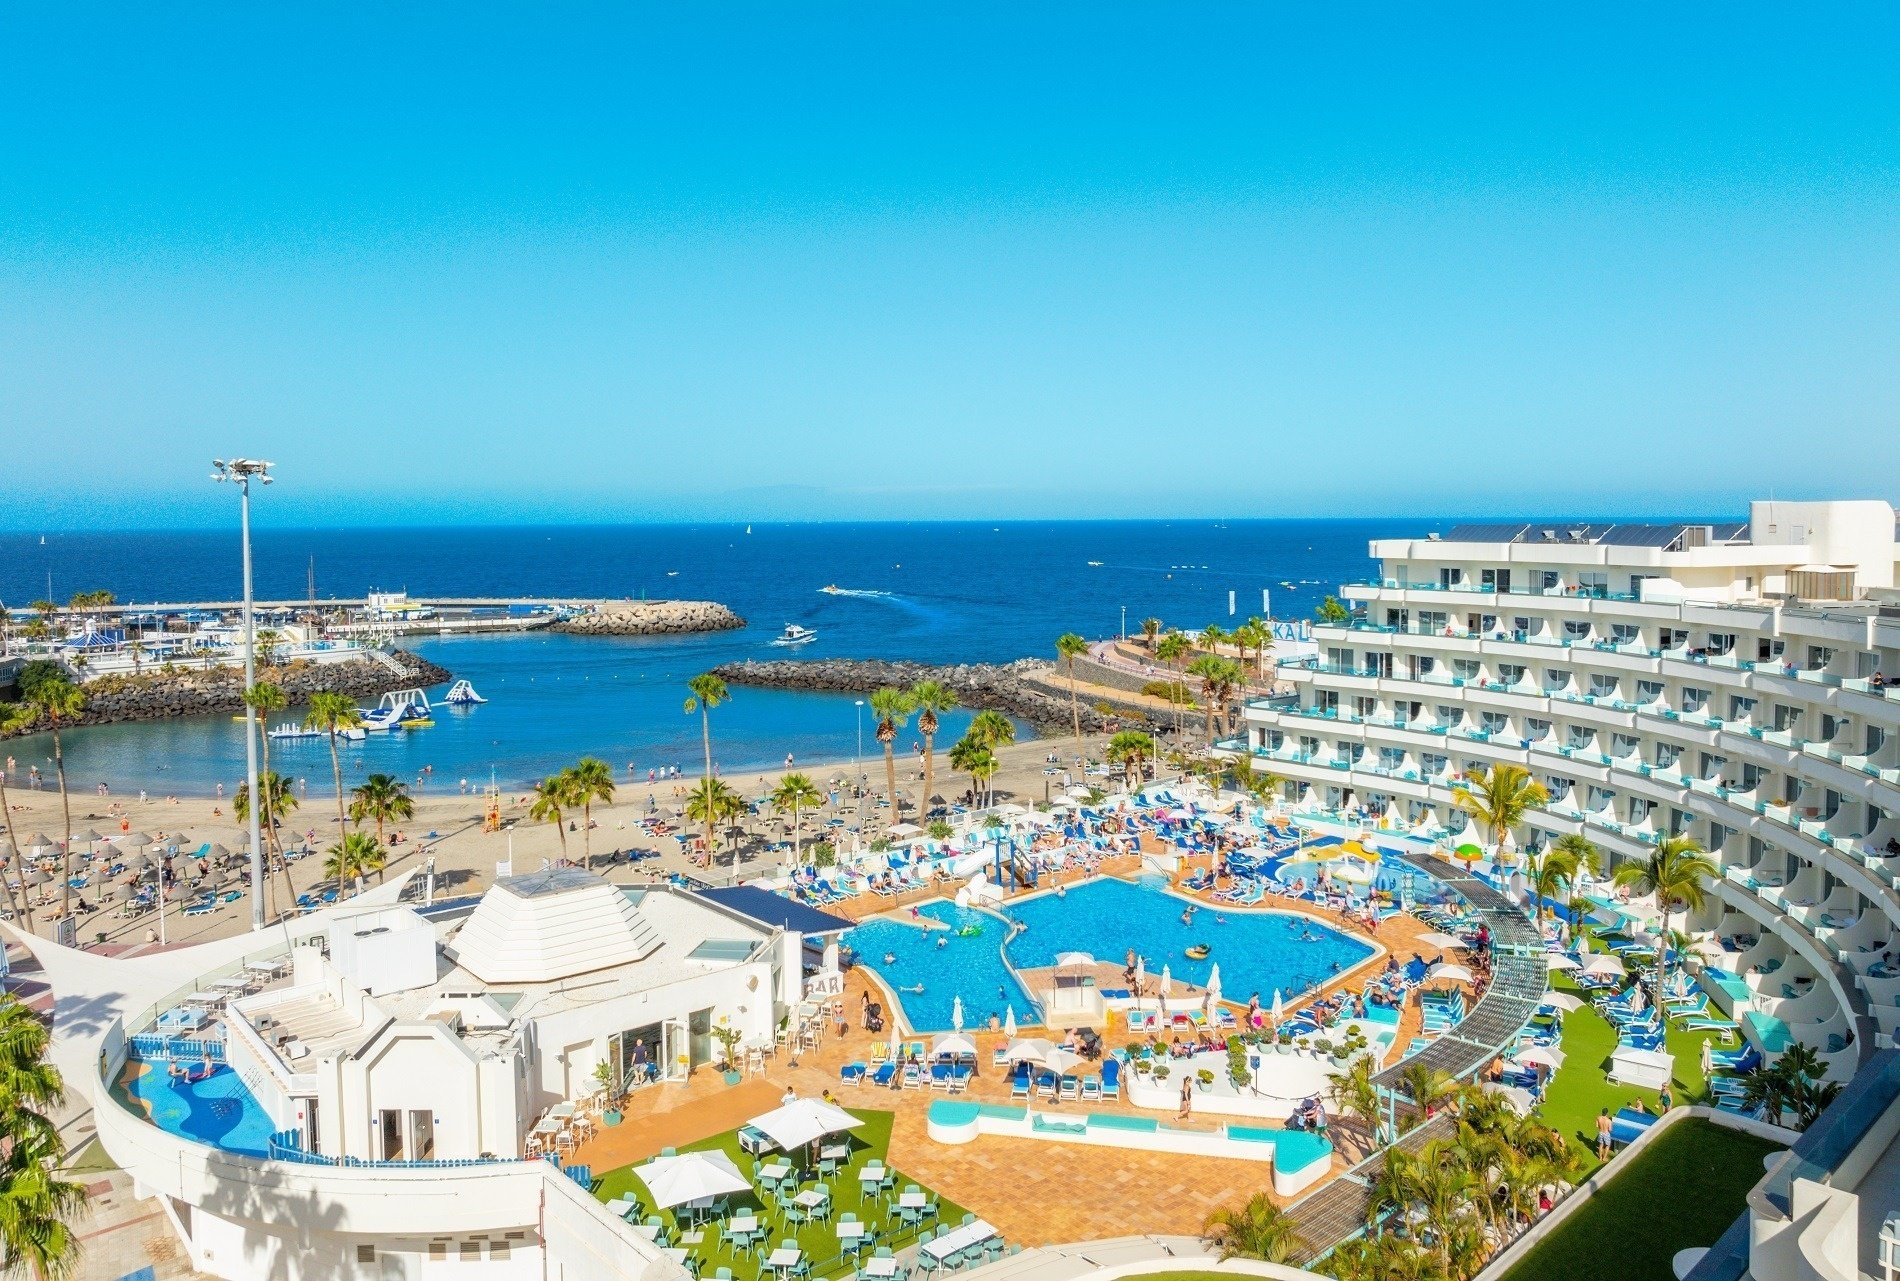 a large swimming pool in front of a hotel with the ocean in the background